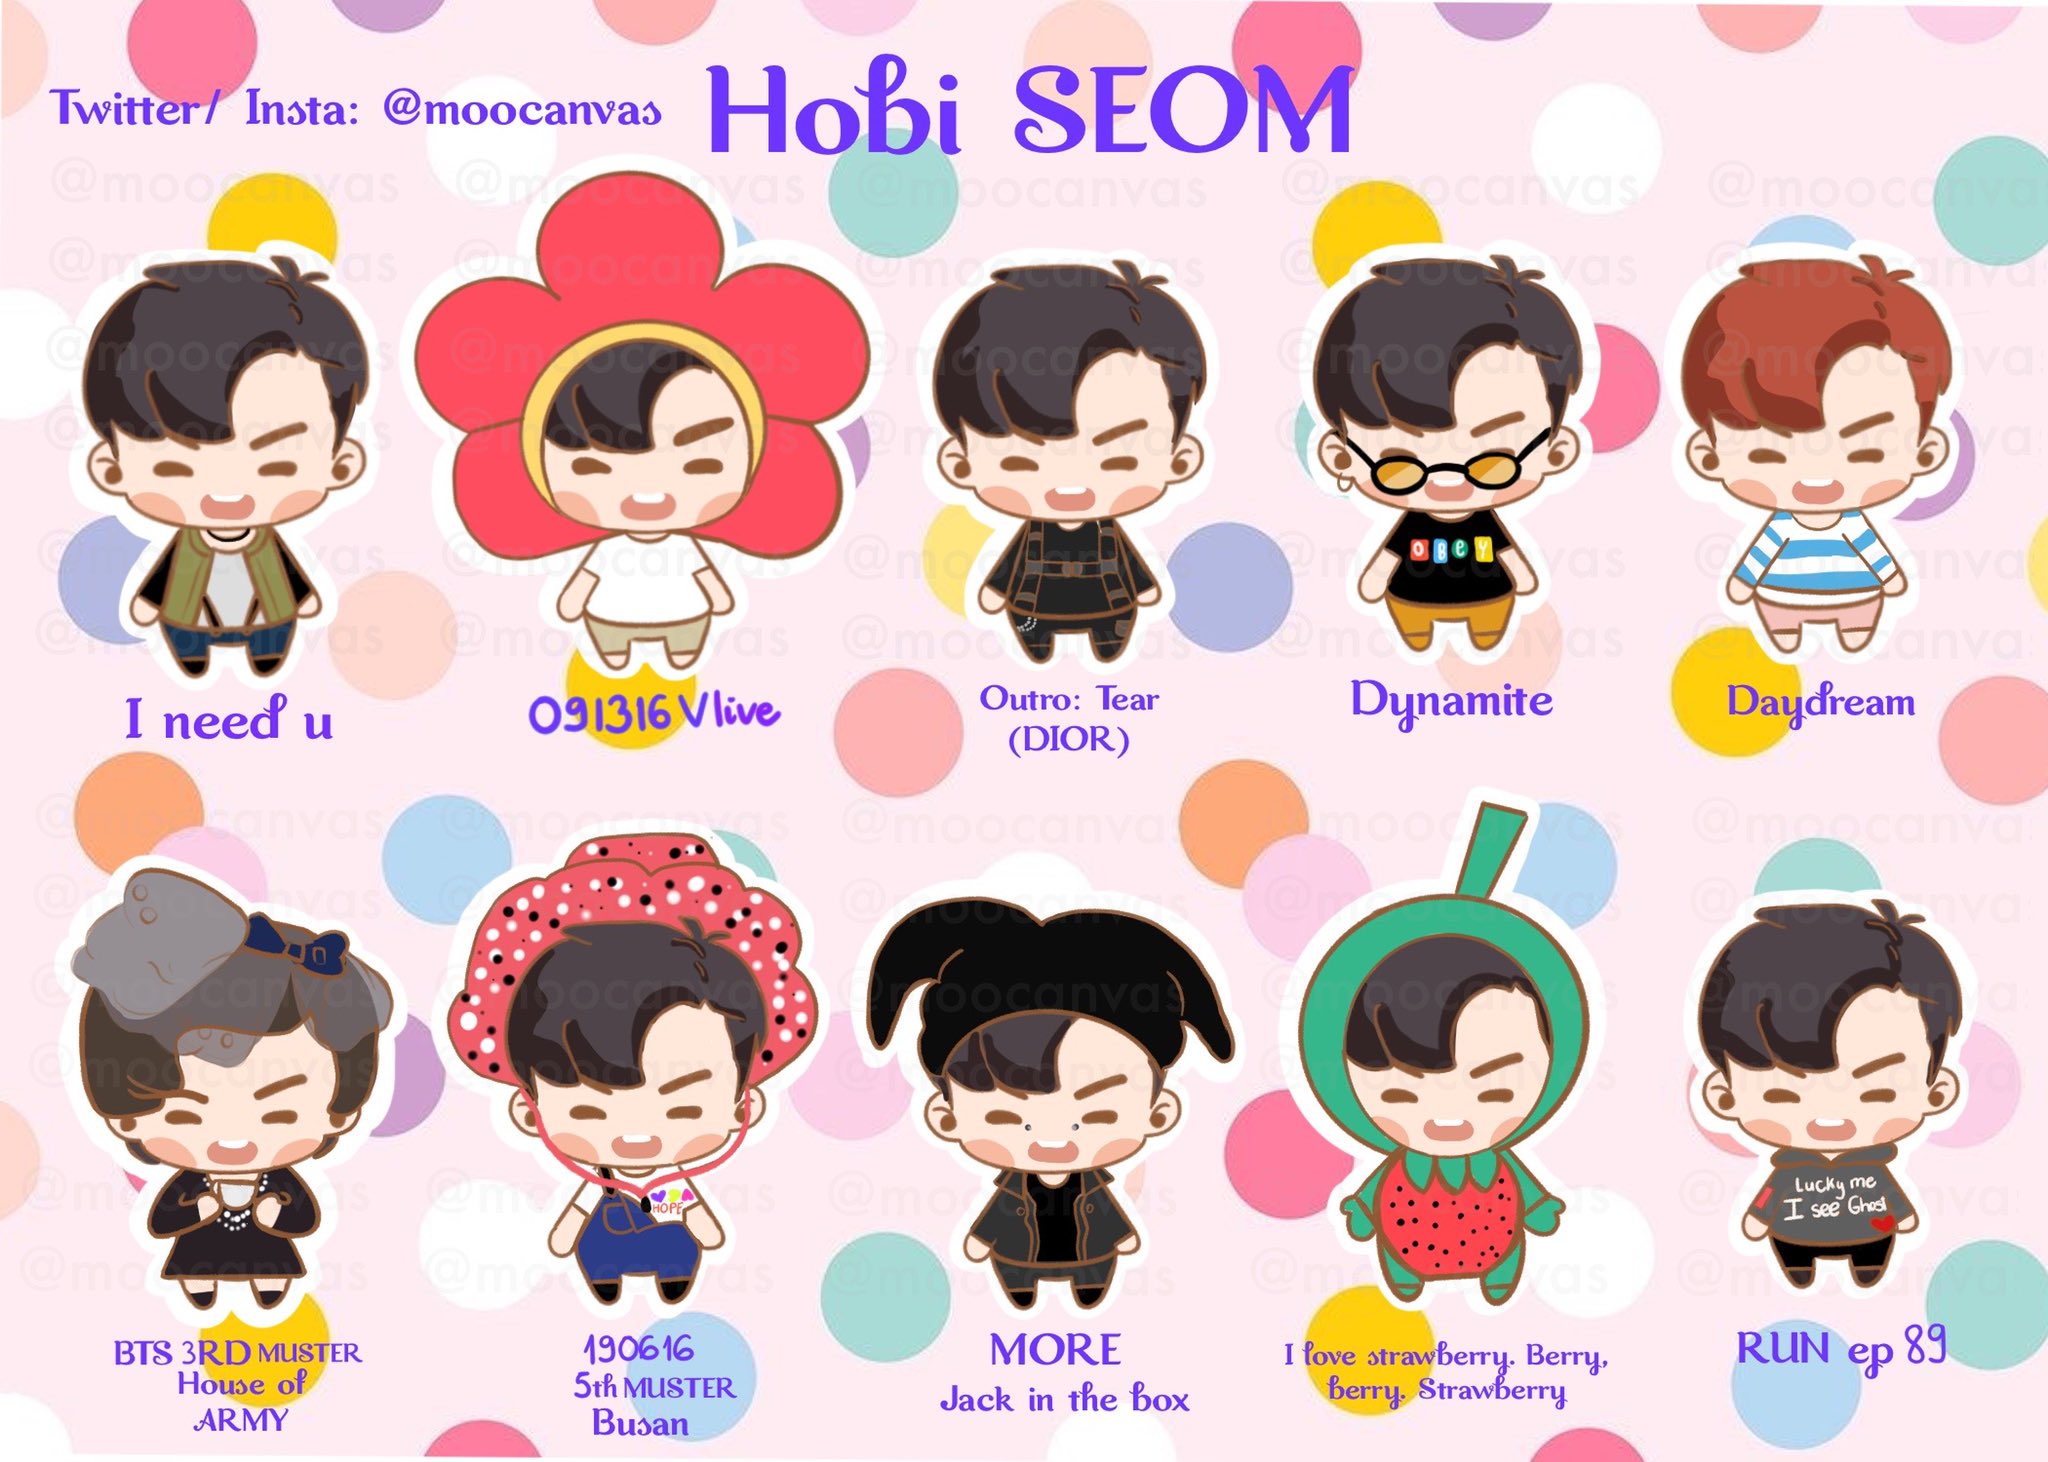 BTS Hoseok Jhope in the Seom Iconic Outfits Stickers Sheet 